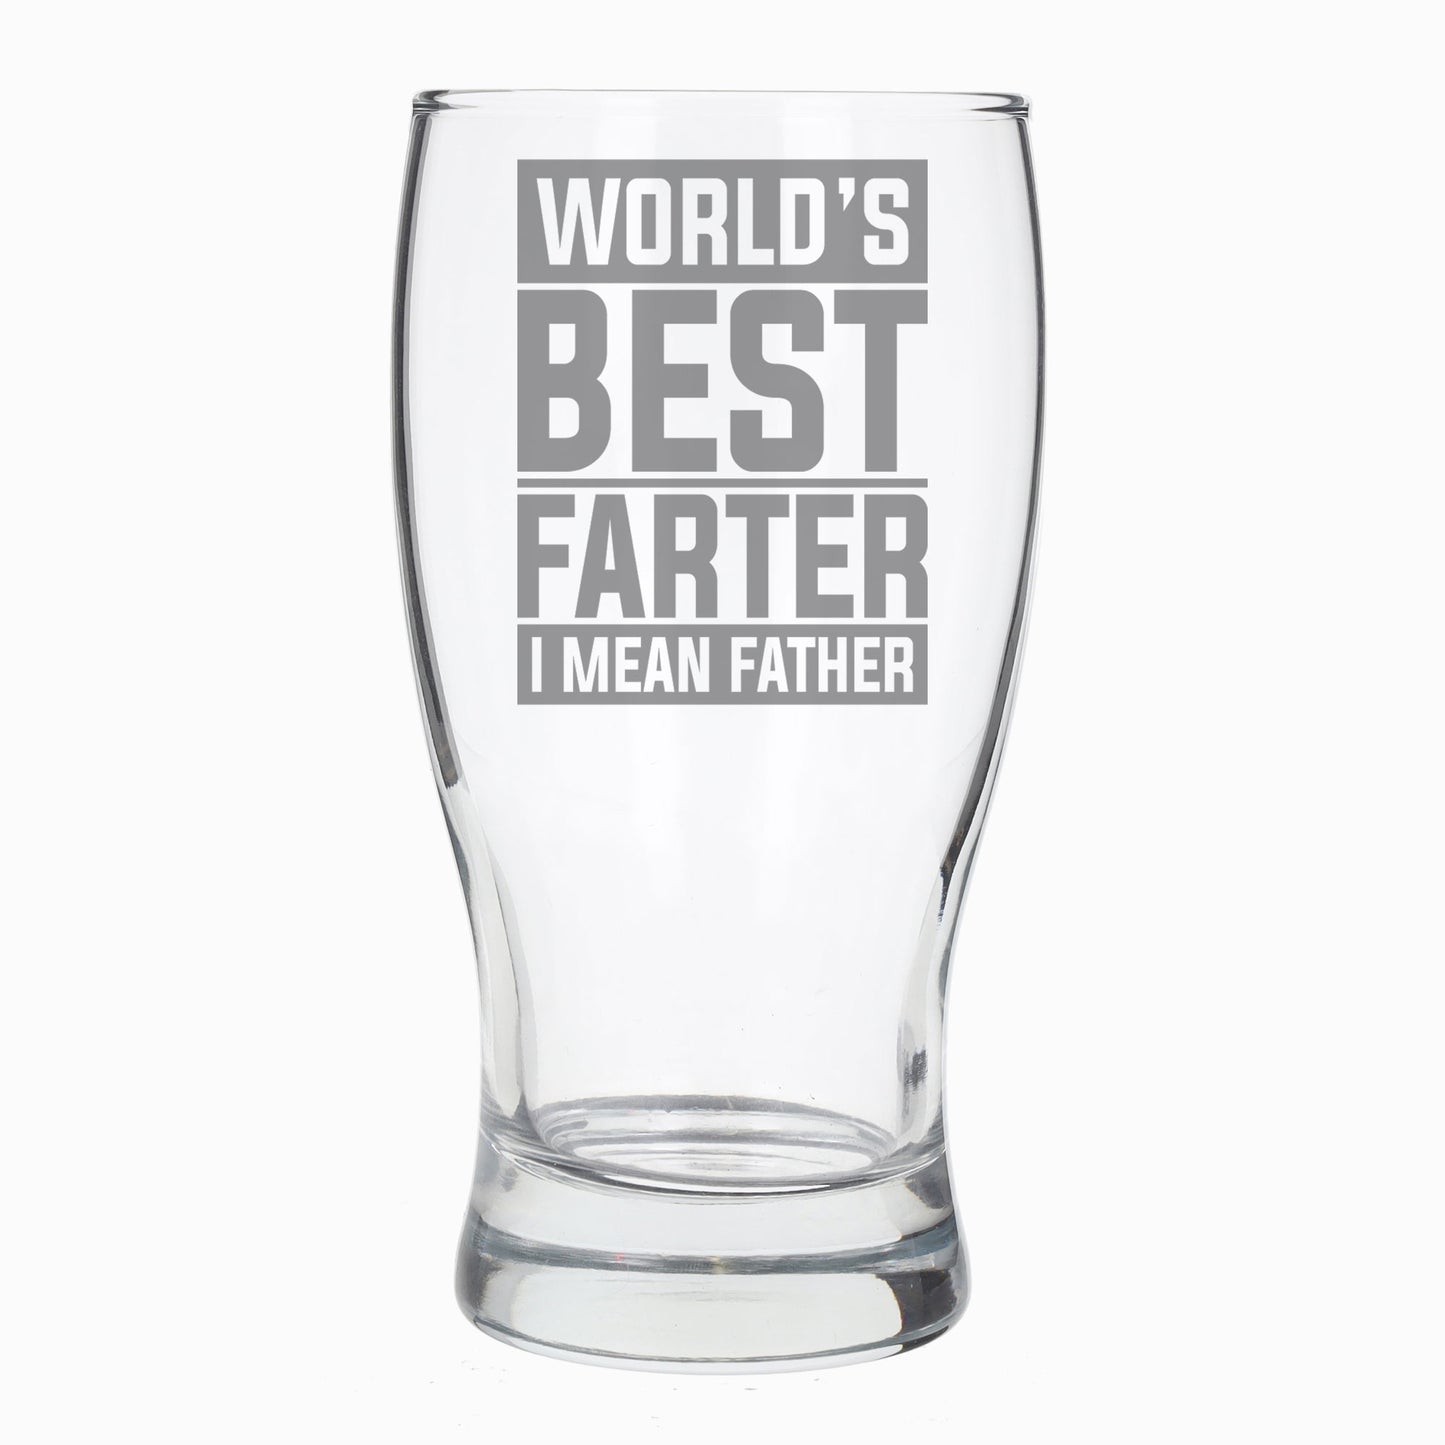 Worlds Best Farter I Mean Father Engraved Beer Glass and/or Coaster Set  - Always Looking Good - Block Style Beer Glass Only  